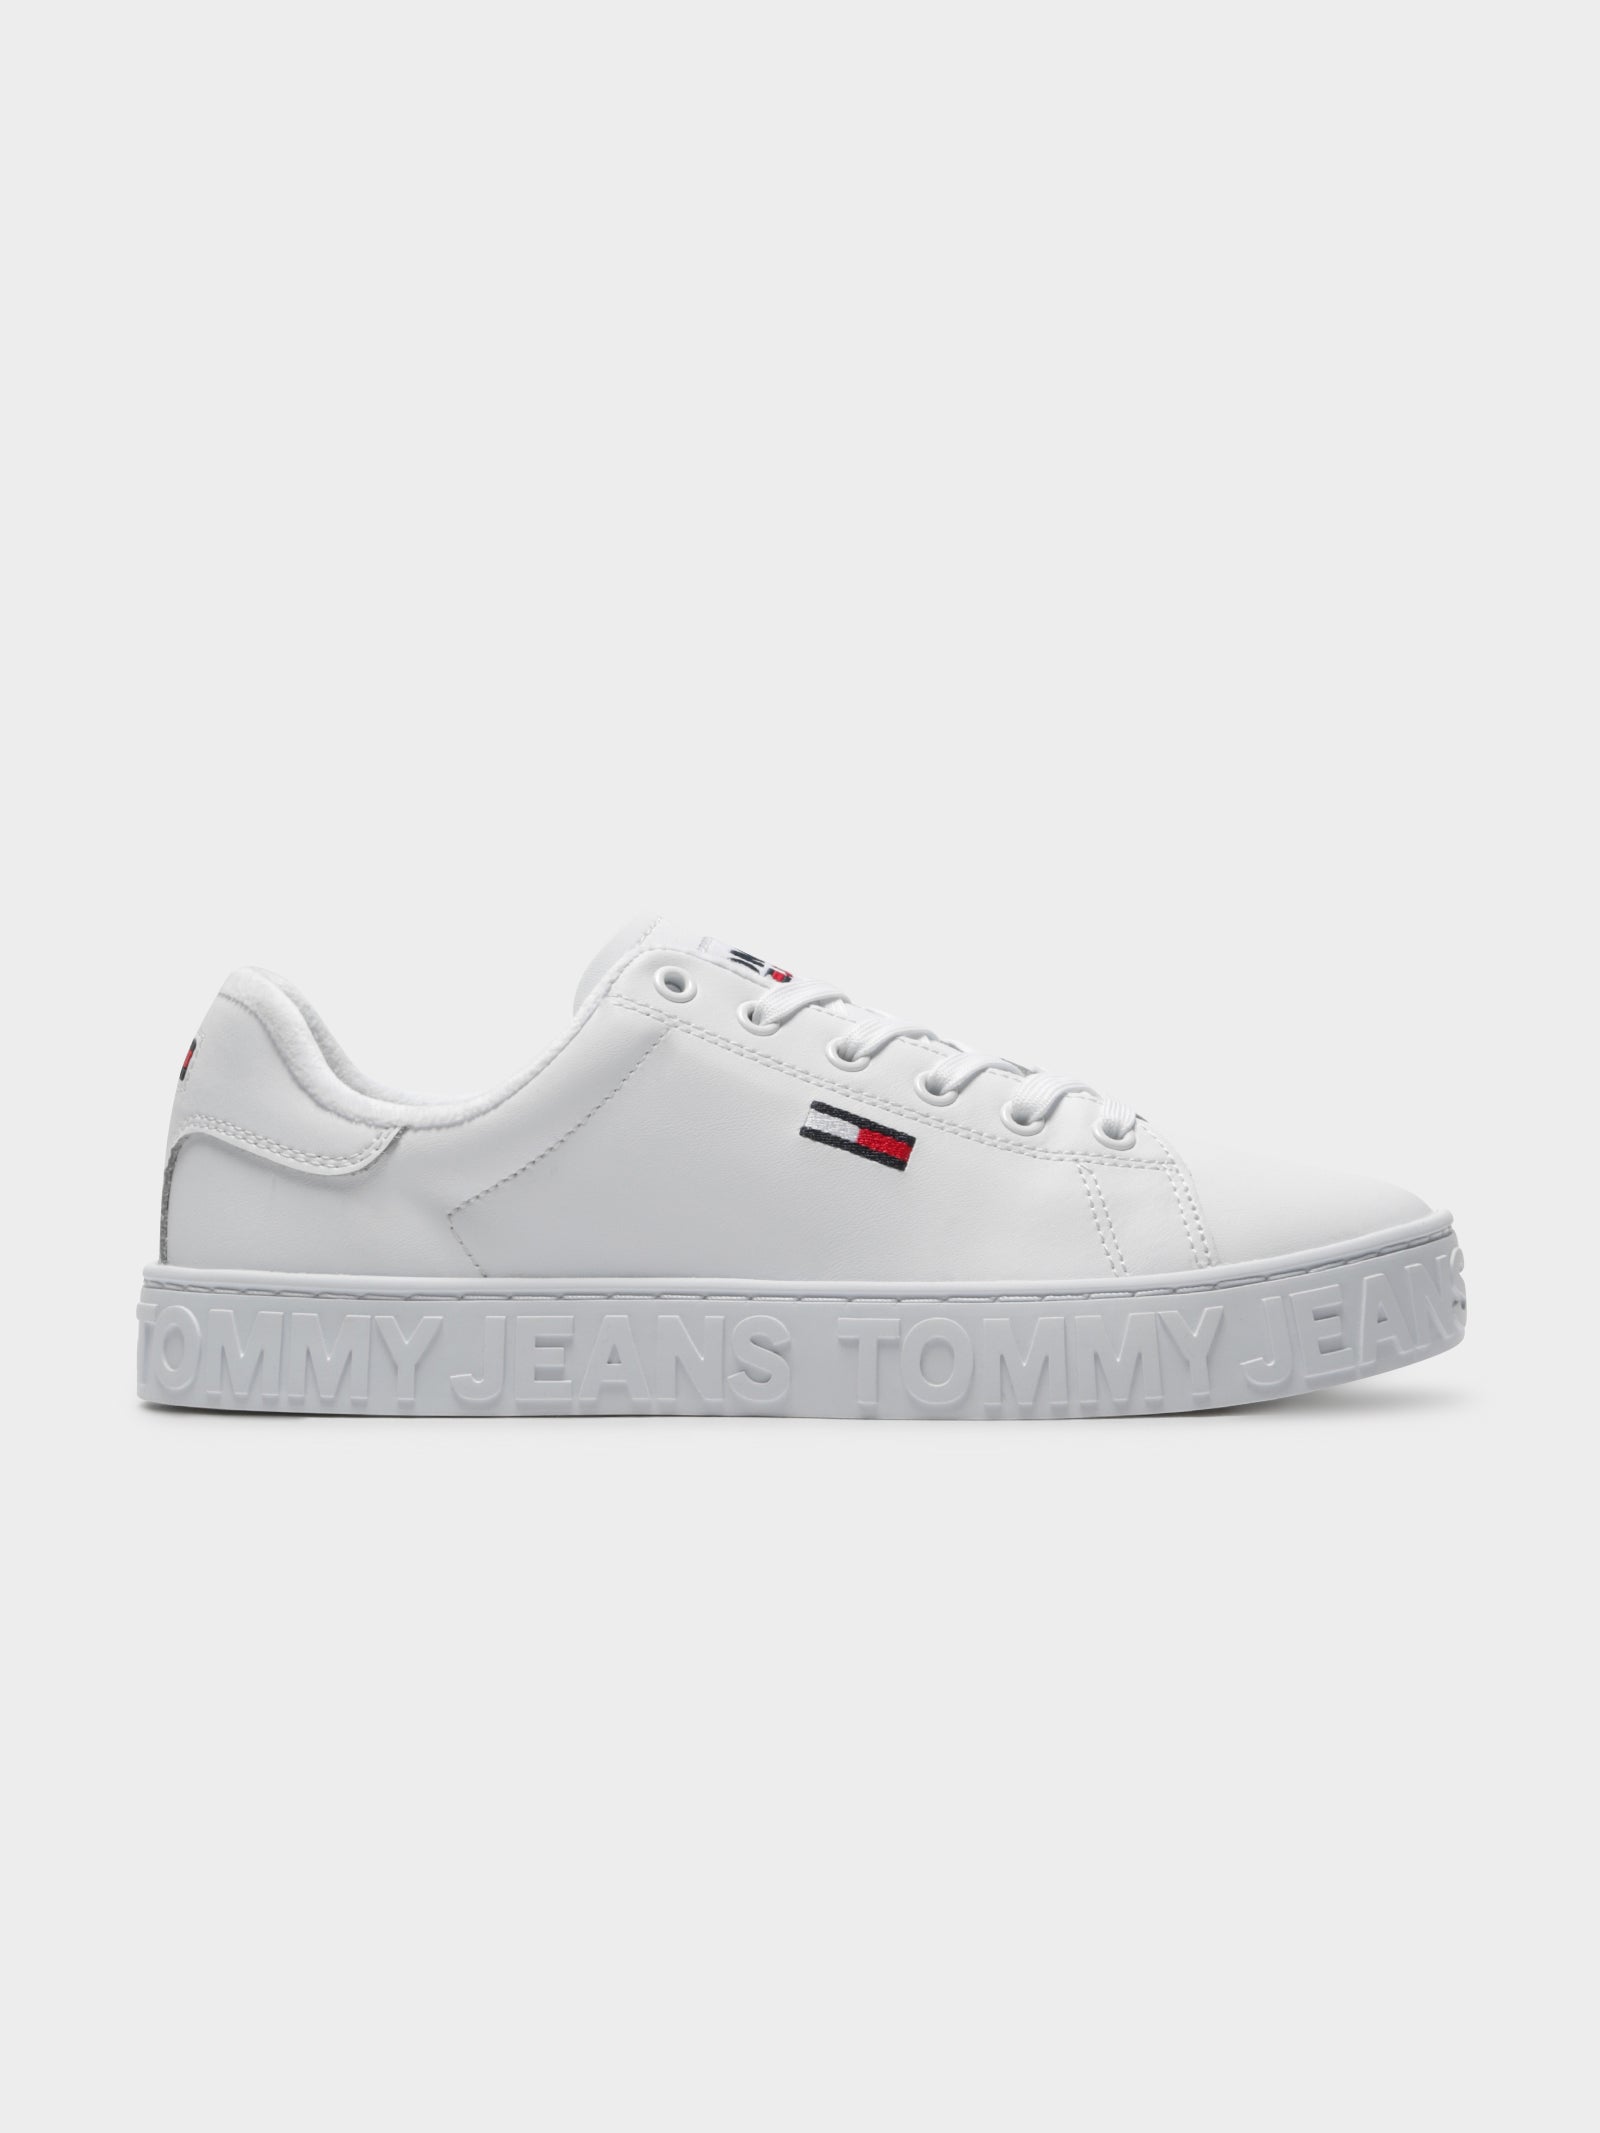 Cool Tommy Jeans Cupsole Sneakers in 